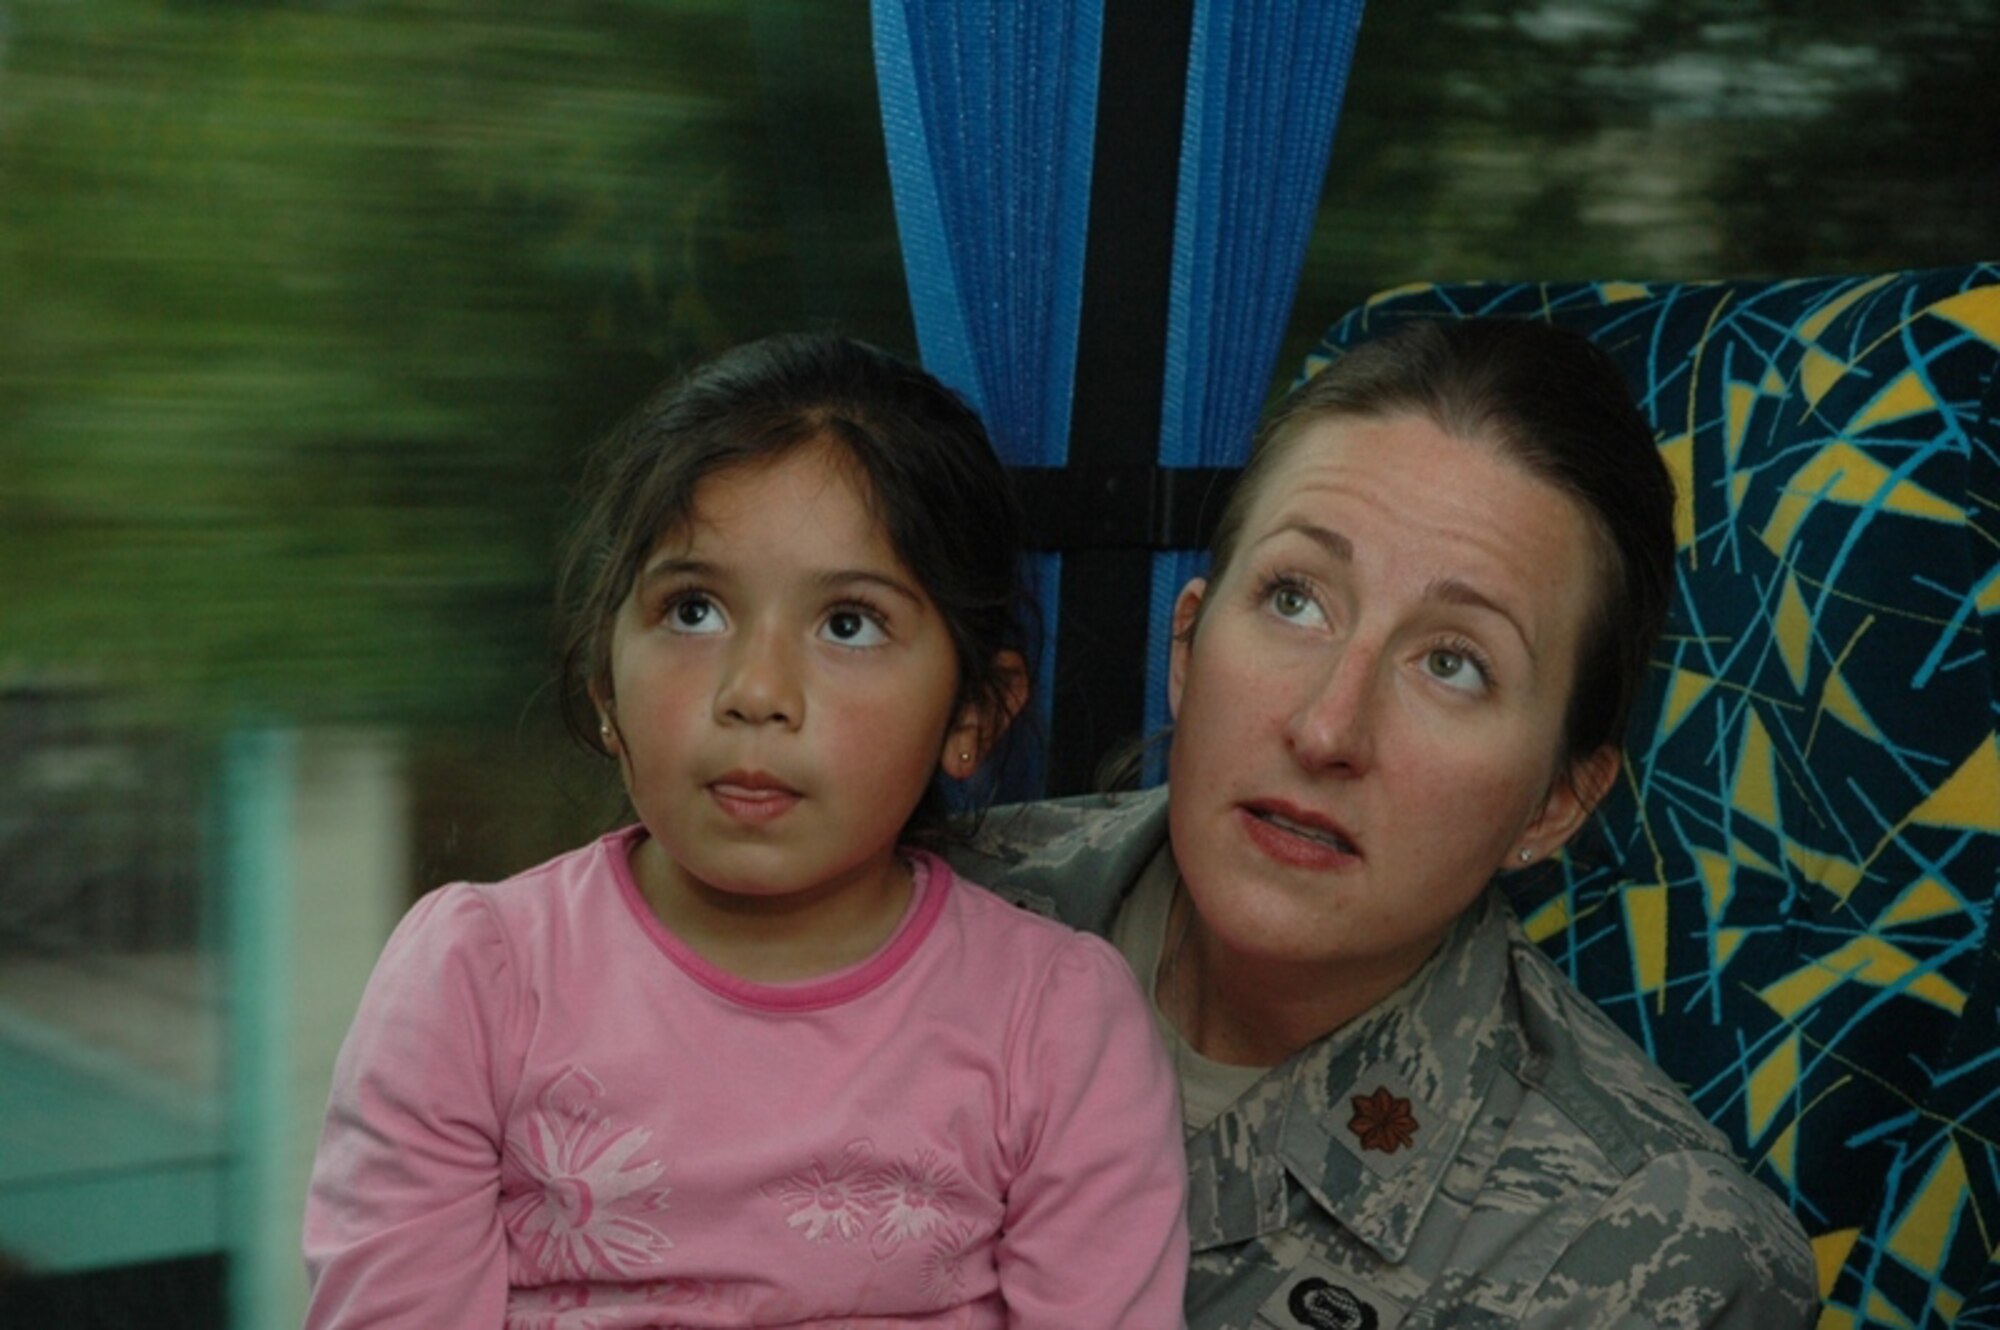 SANTIAGO, Chile -- Maj. Jana Nyerges, a member of Air Forces Southern participating in subject matter exchange with the Chilean Air Force in Santiago, Chile, and her new-found friend, a child from the Centro Comunitario Angels, or 'Angels Community Center' watch cartoons on the bus after spending the day at the Museo Interactivo Mirador.  A group of Airmen sponsored children from the school to visit the museum after landing in country only a few hours.  (Courtesy photo)